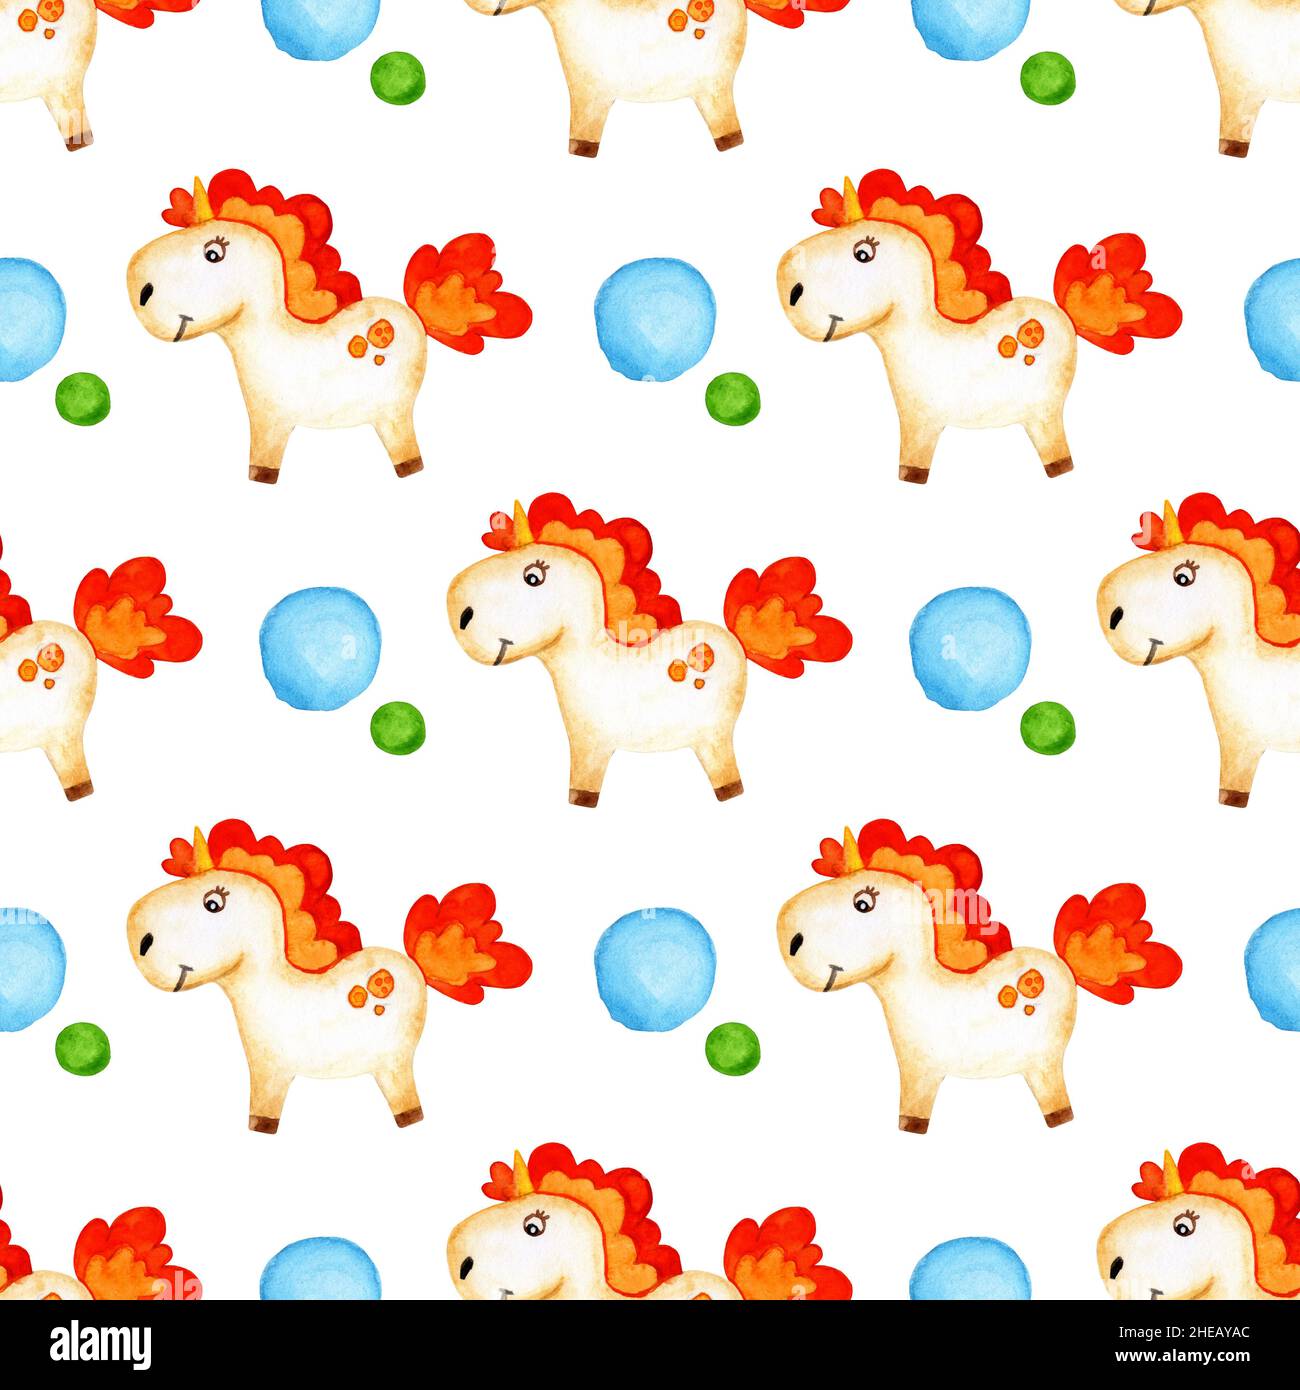 Watercolor painting pattern of a little pony with a red mane and circles. seamless repeating print fairytale unicorn pattern. Horse for design, decora Stock Photo